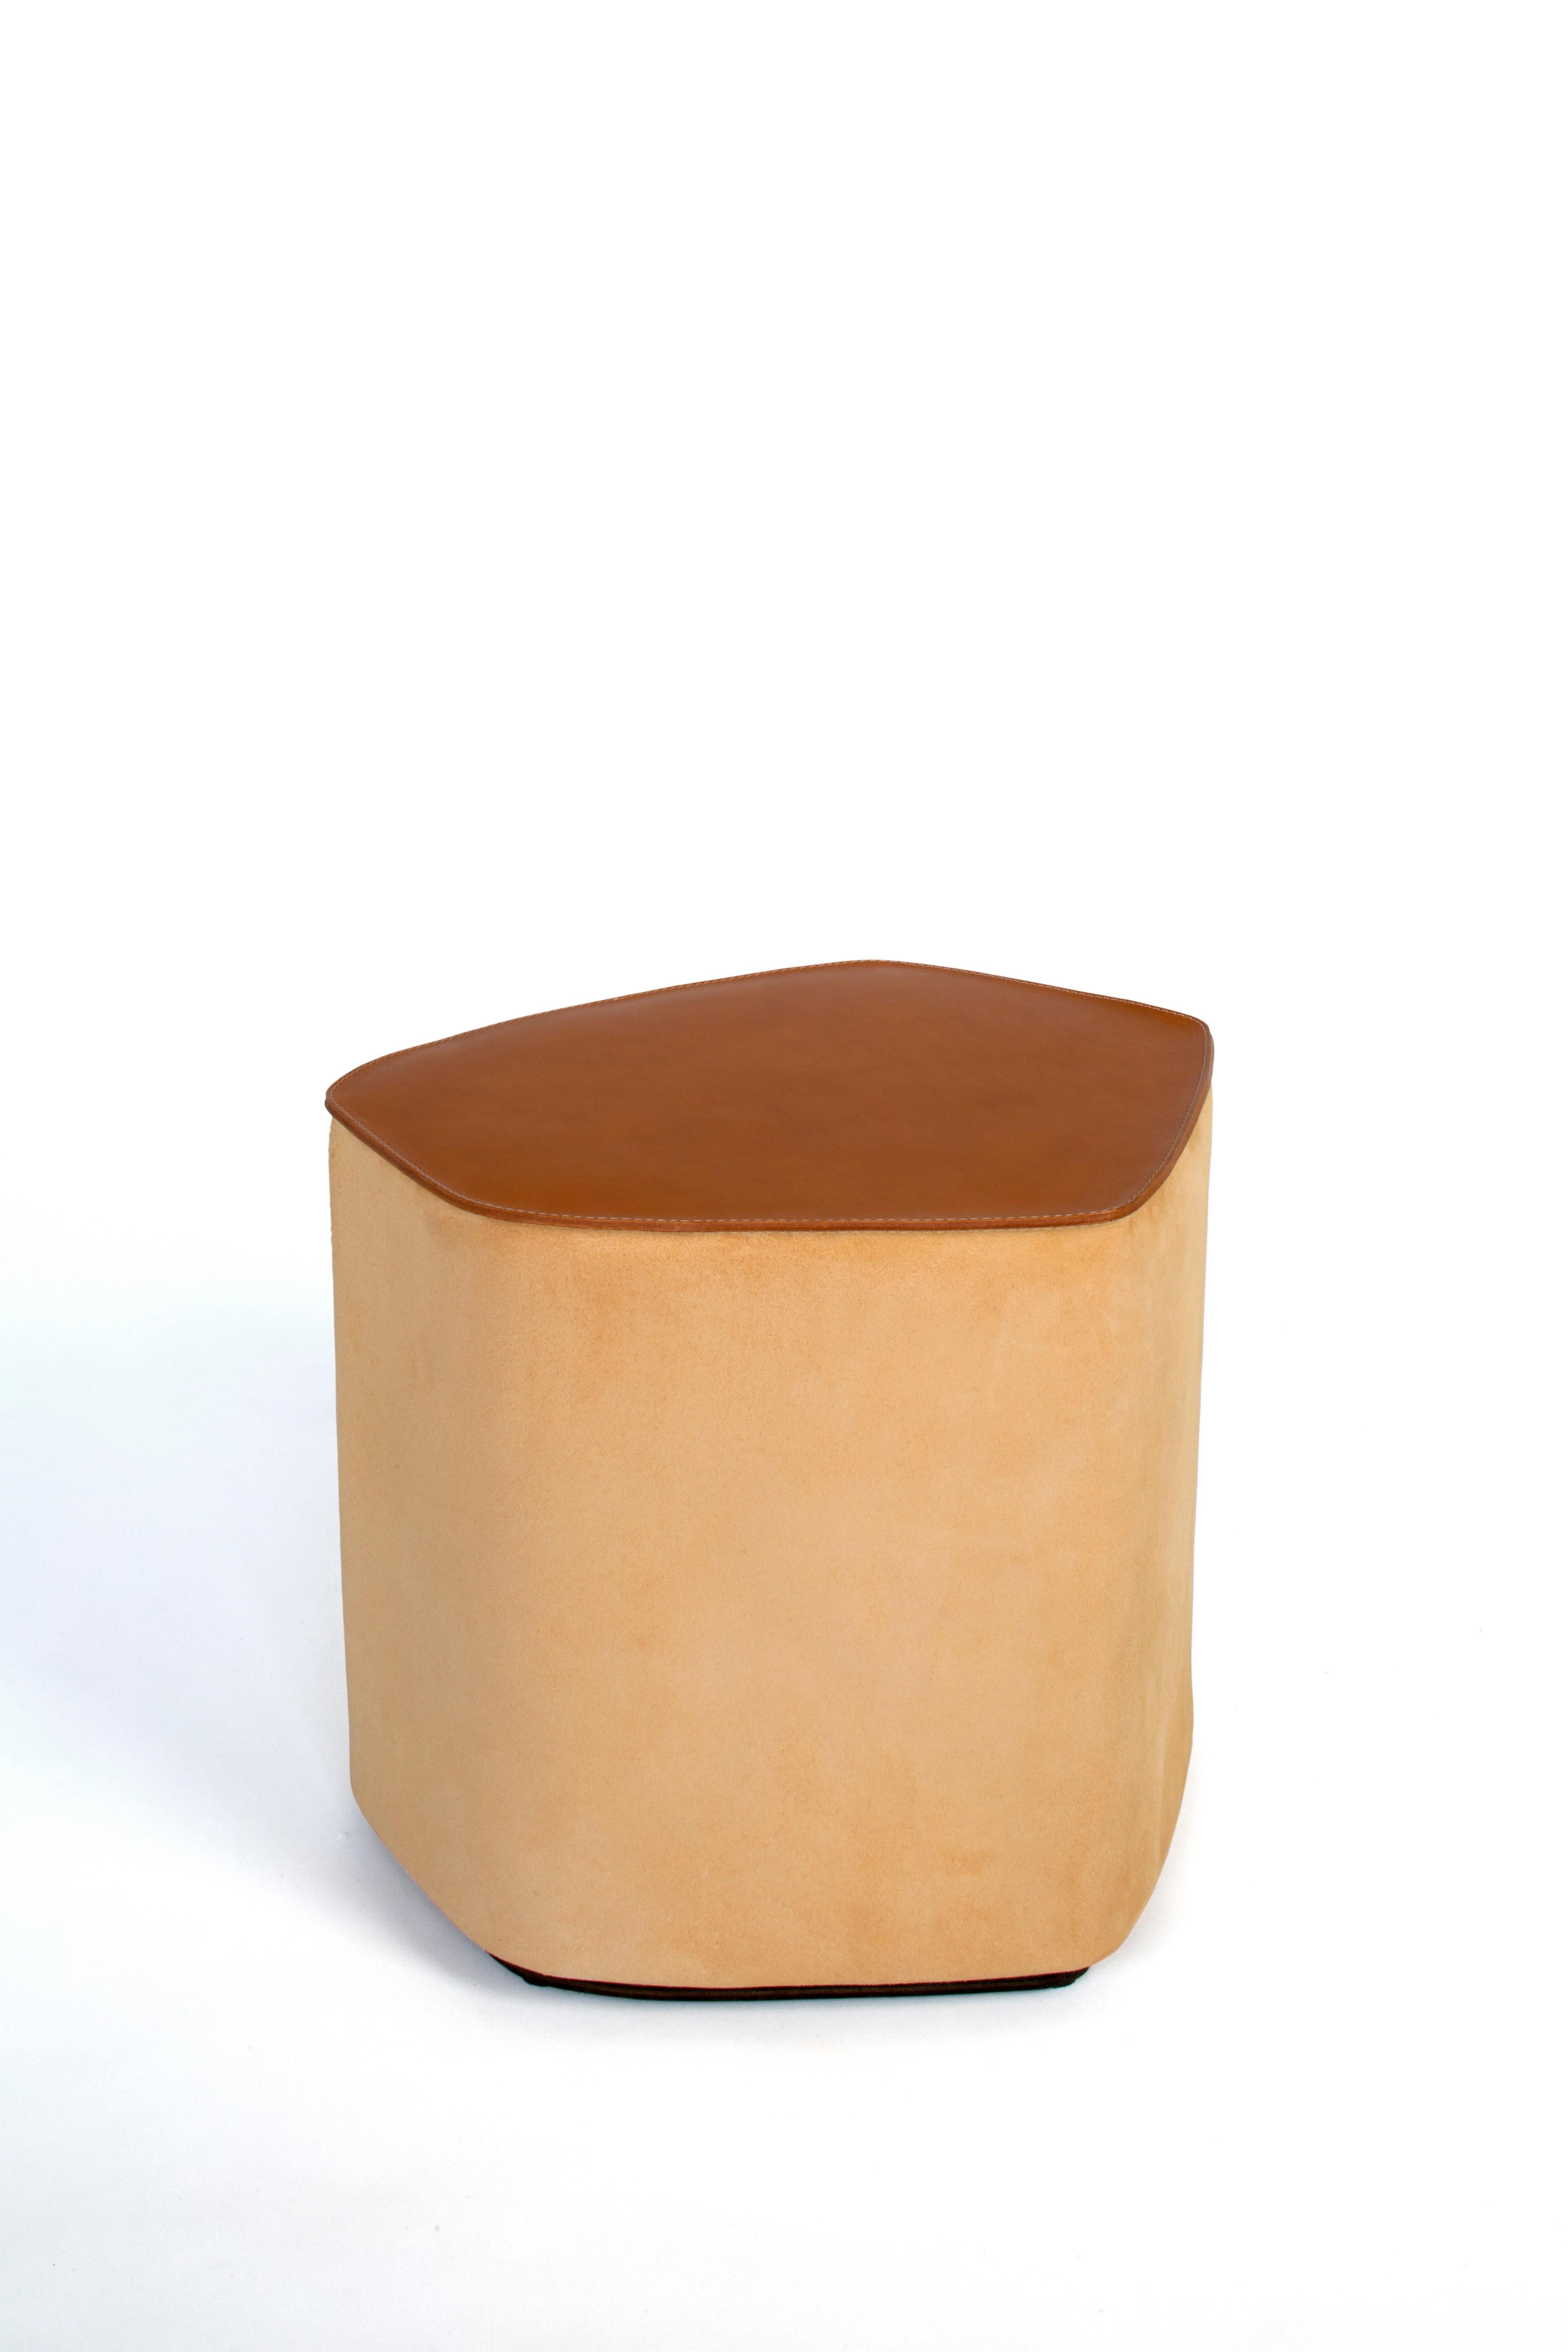 Small pouf! leather stool by Nestor Perkal
Dimensions: W 45 x D 39 x H 40 cm
Materials: Leather, poplar plywood, suede.
Available in other colors and in 3 sizes.

The POUF! collection is made up of three seats made of leather and suede. They